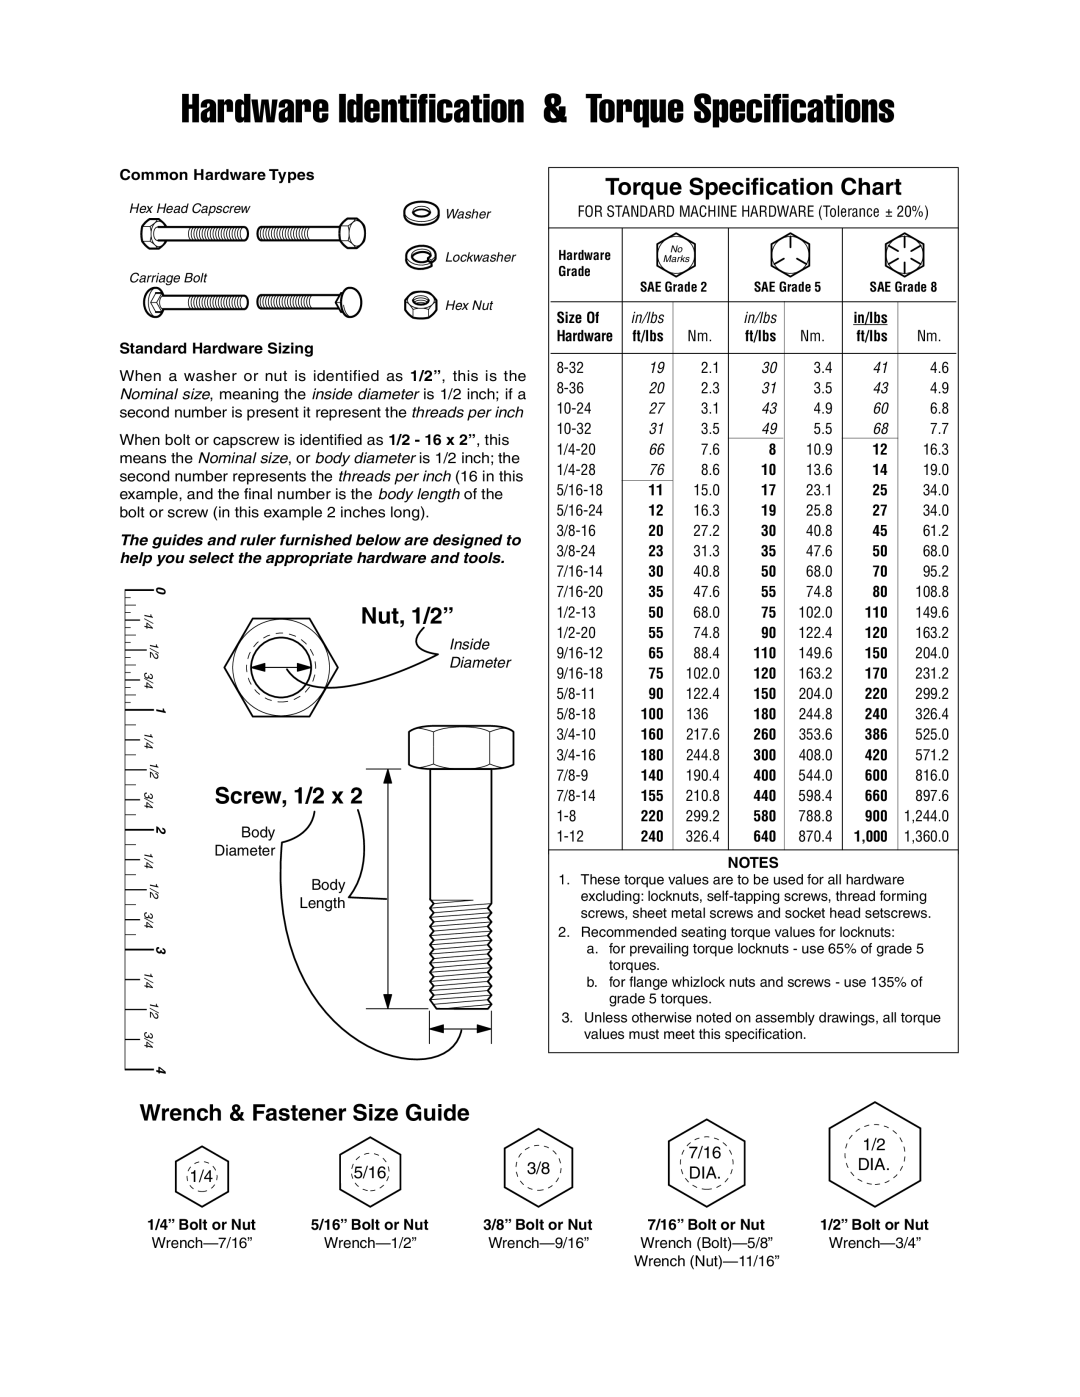 Snapper 4564 Wrench & Fastener Size Guide, Hardware Identification & Torque Specifications, Torque Specification Chart 